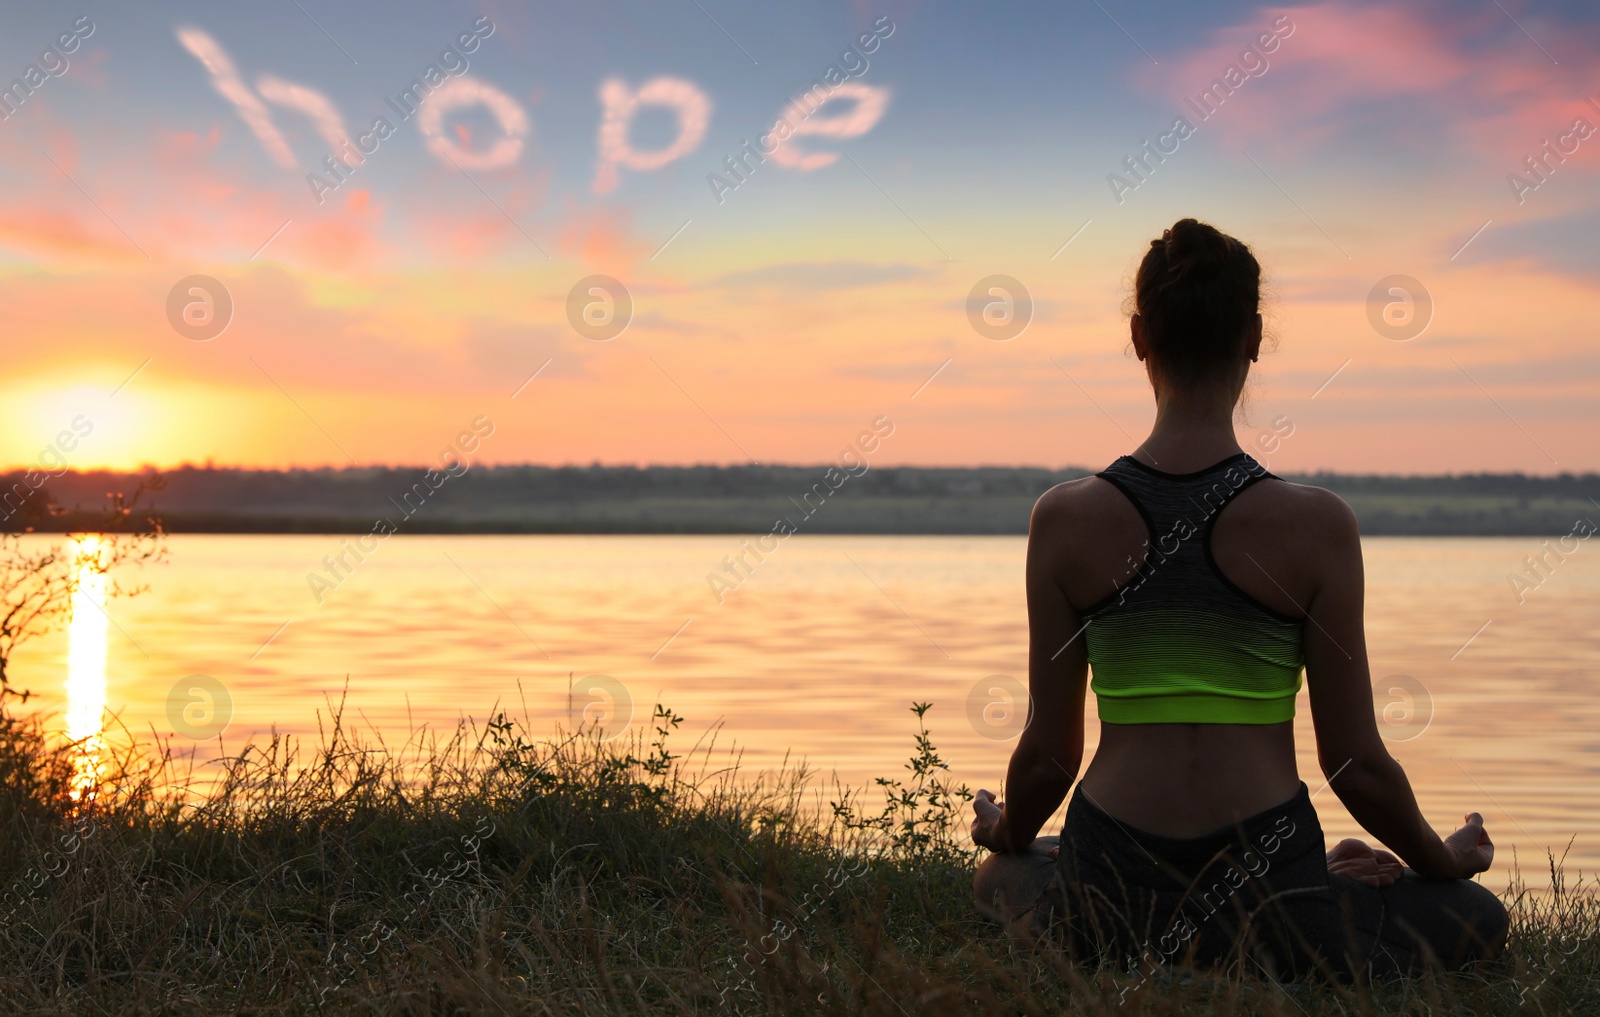 Image of Concept of hope. Woman meditating at sunset, back view